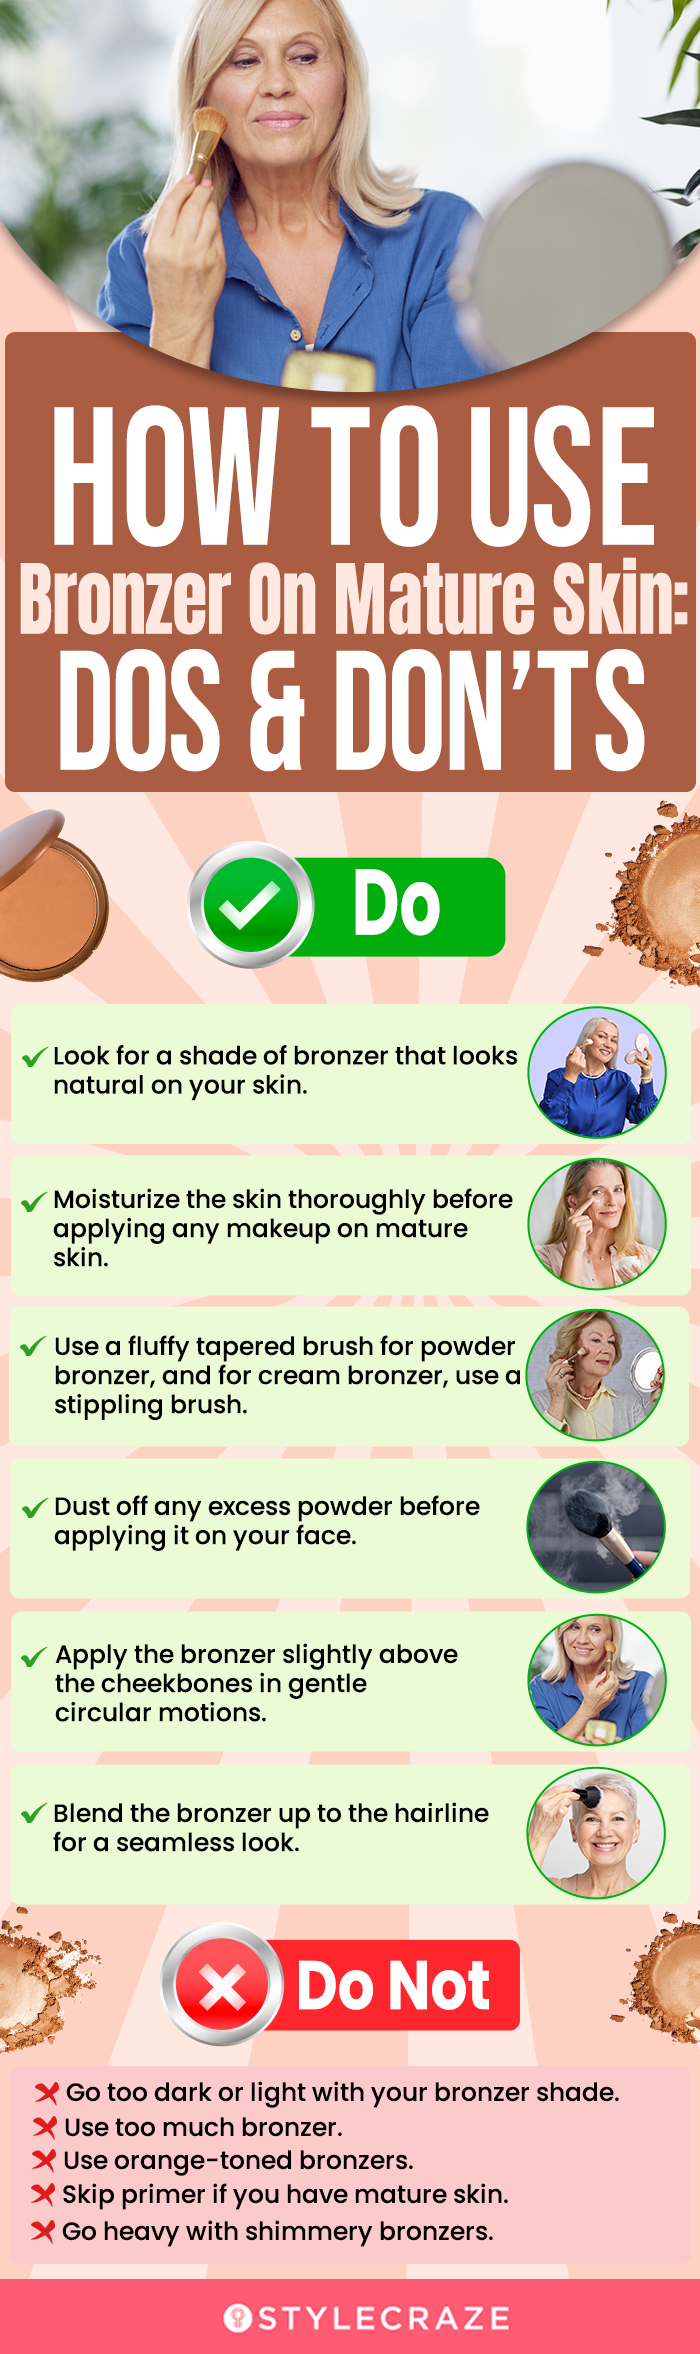 How To Use Bronzer On Mature Skin: DOs & DON’Ts (infographic)